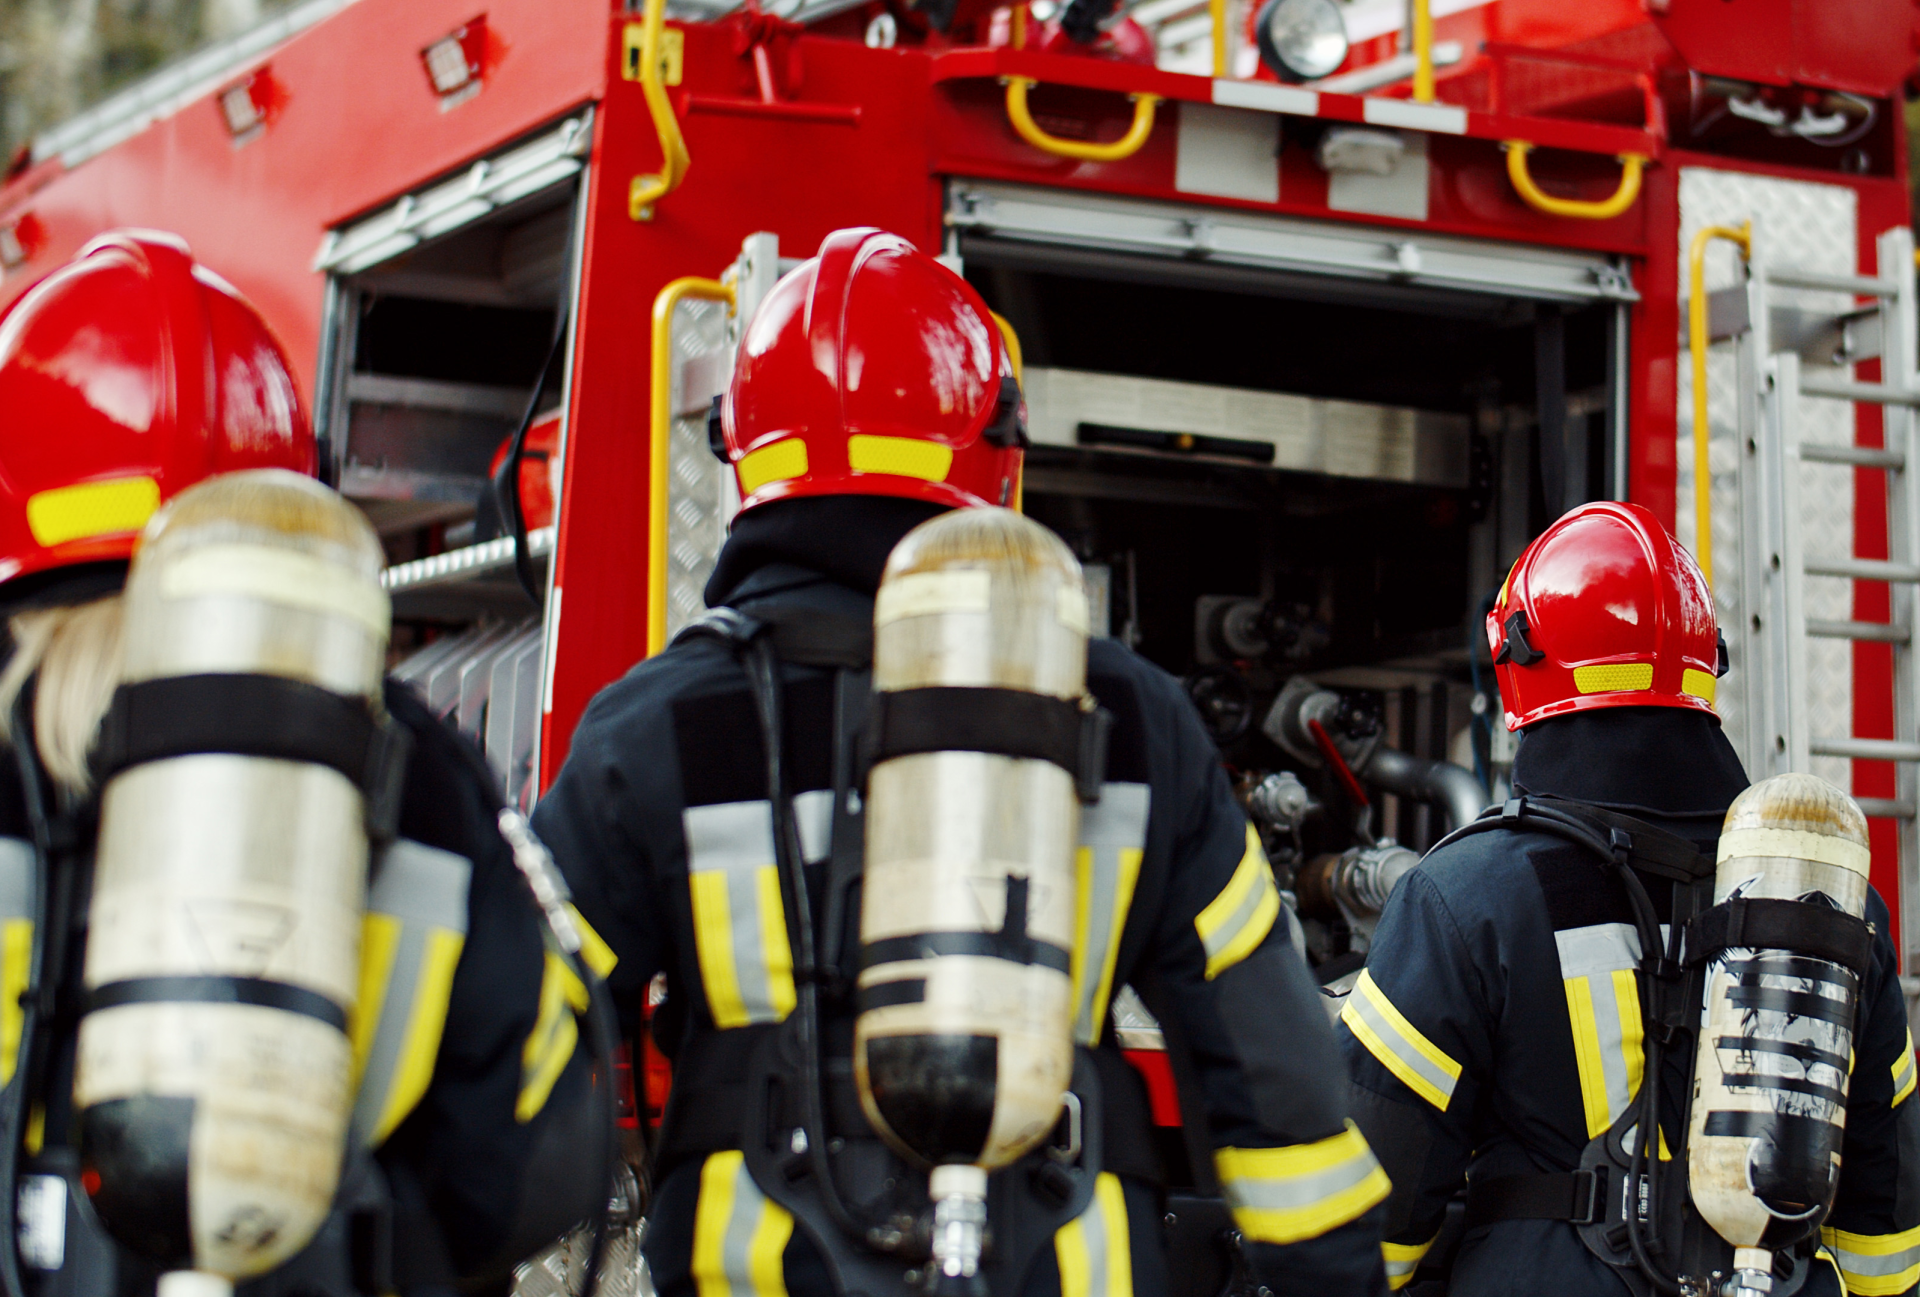 Our solutions for fire brigades